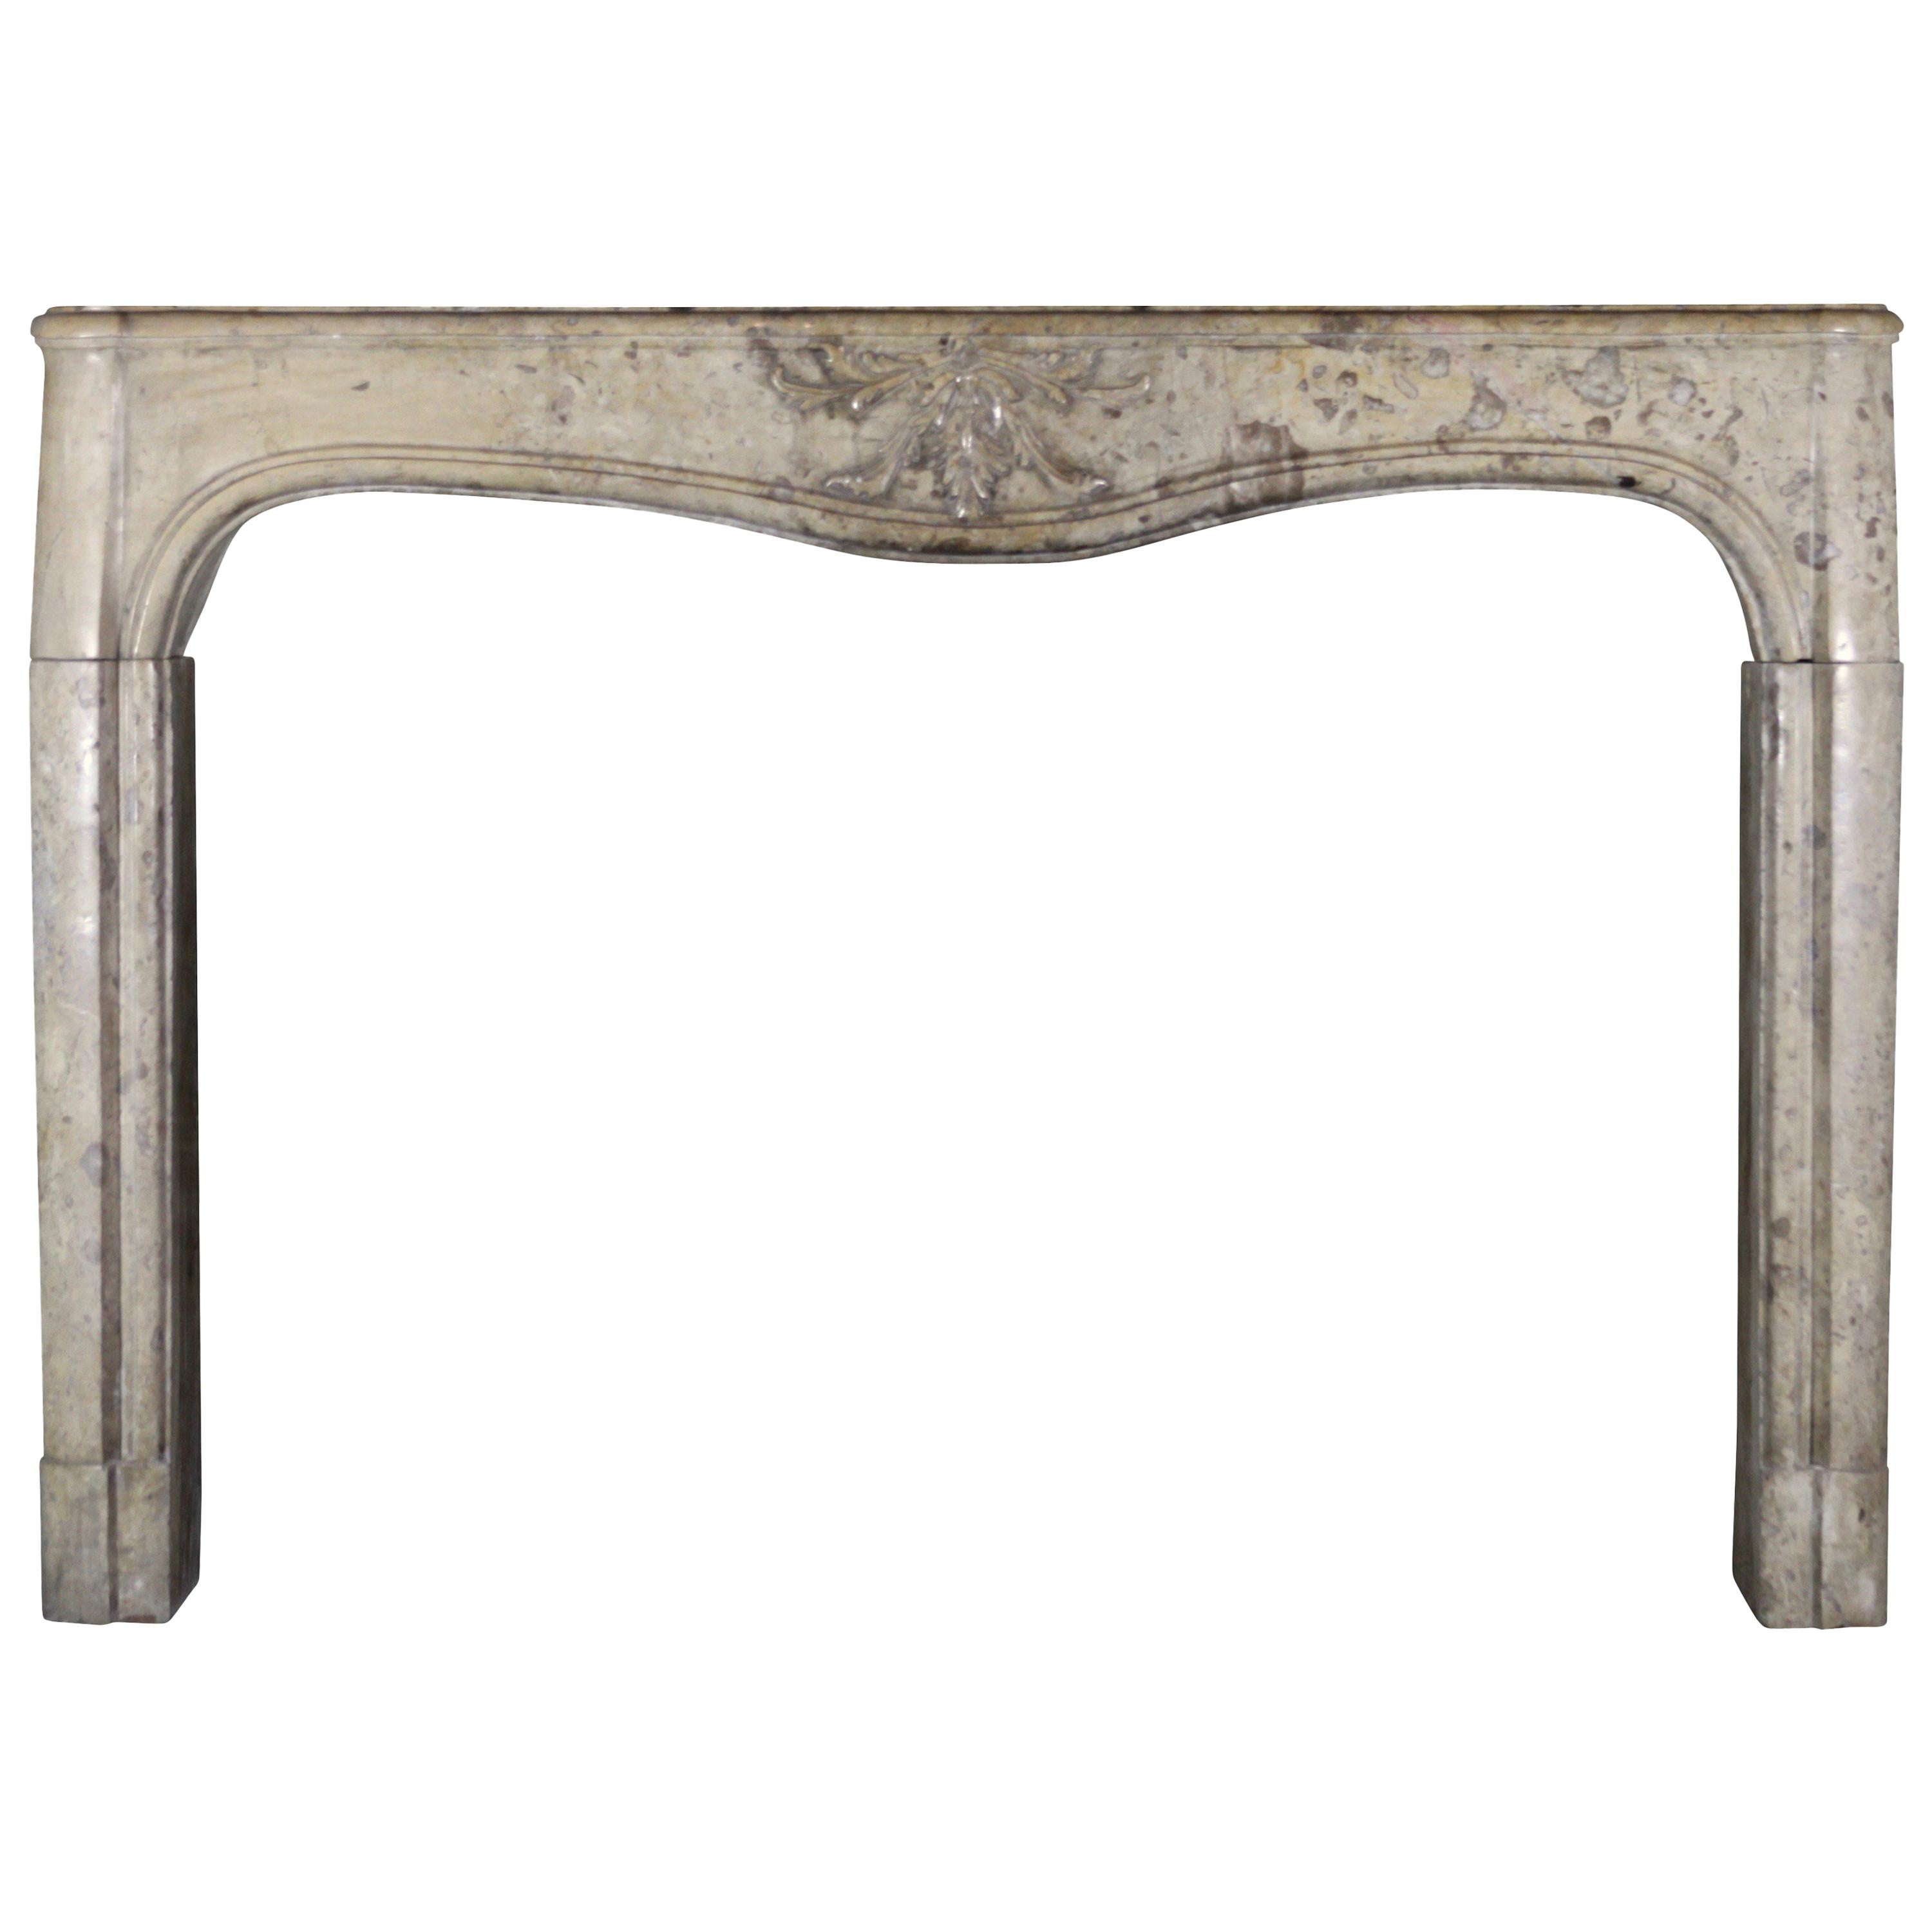 Louis XIV Period Antique Fine French Fireplace Surround For Sale